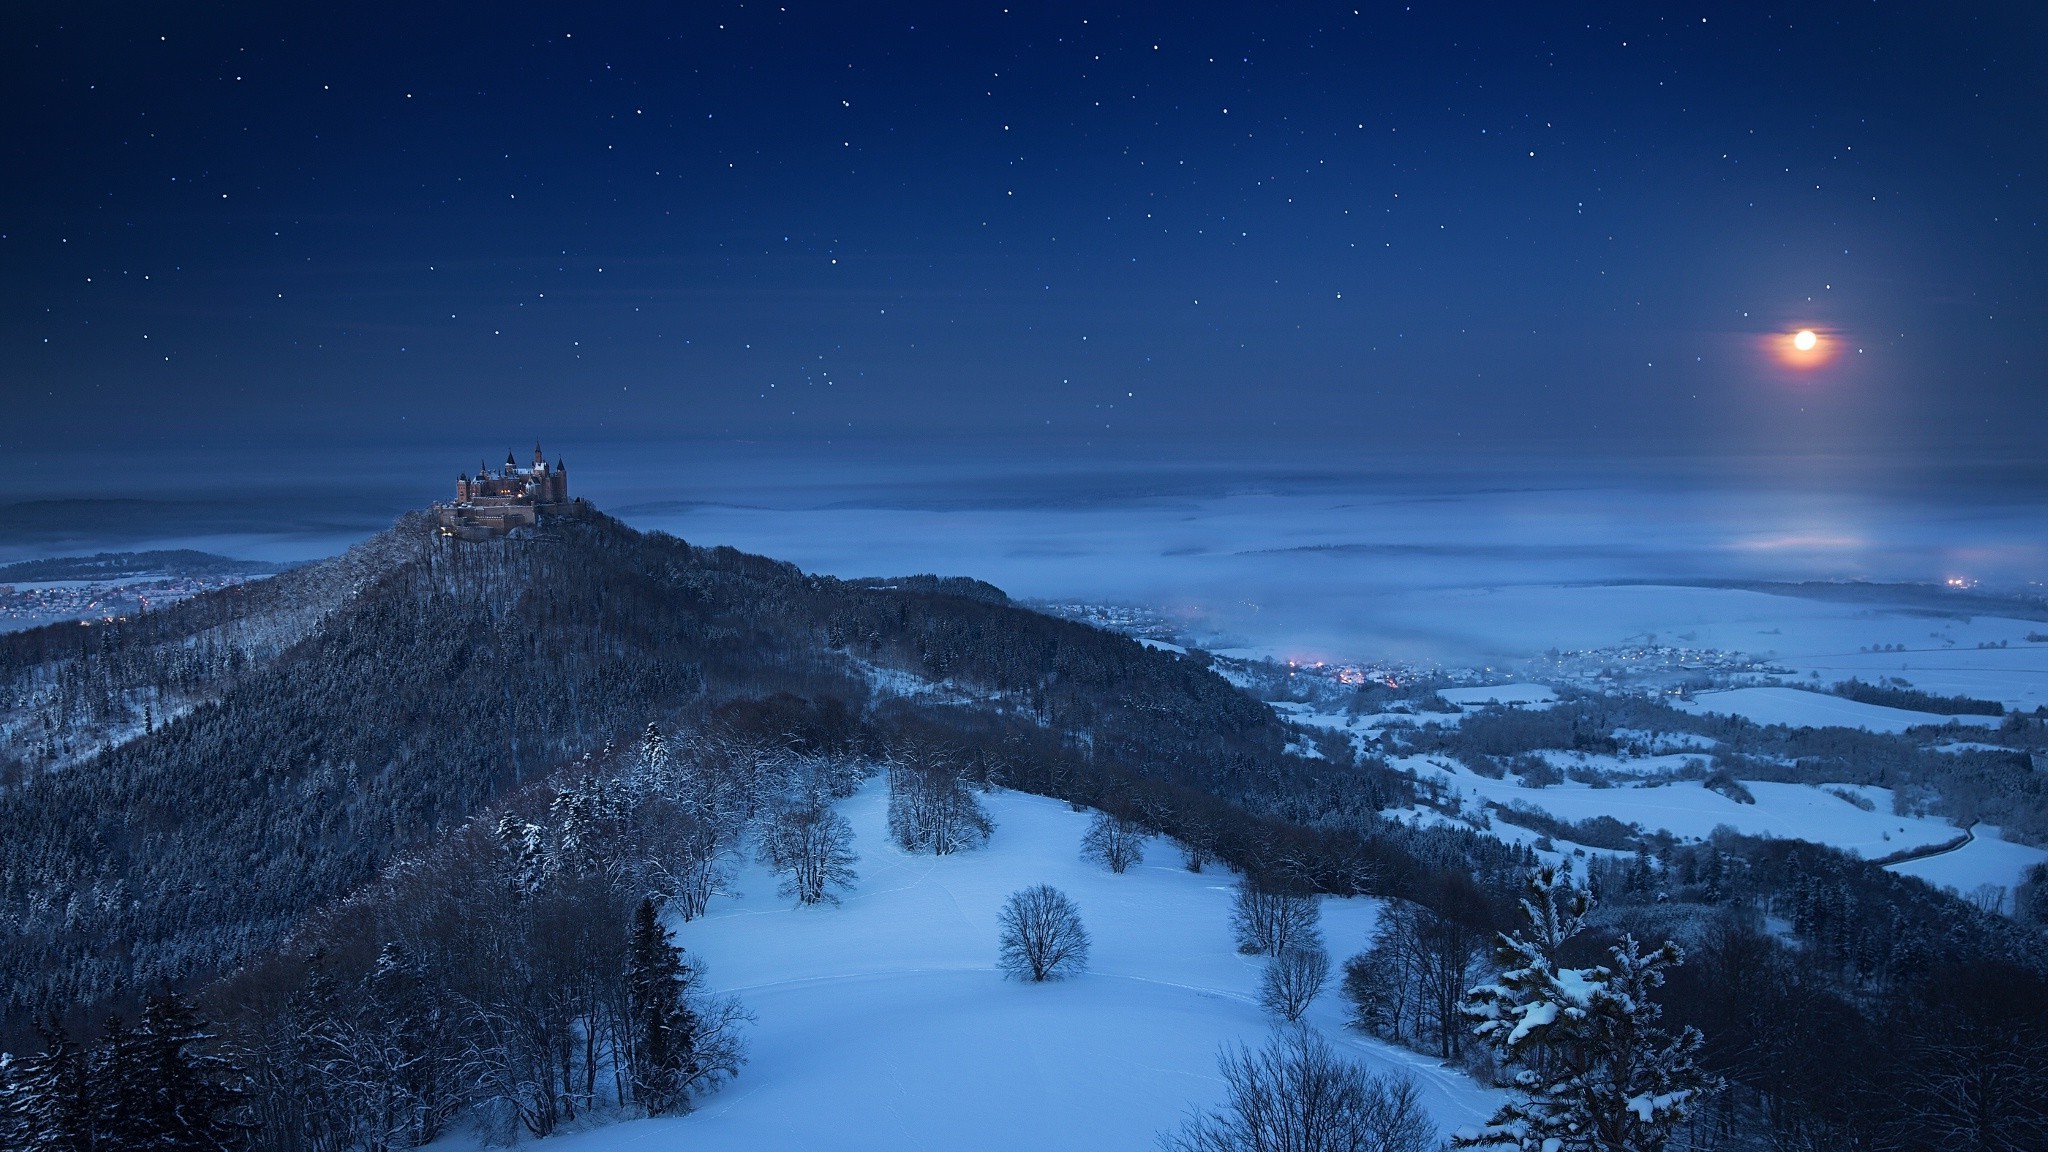 Landscape Nature Winter Castle Snow Forest Moon Starry Night Moonlight Valley Germany Wallpapers Hd Desktop And Mobile Backgrounds